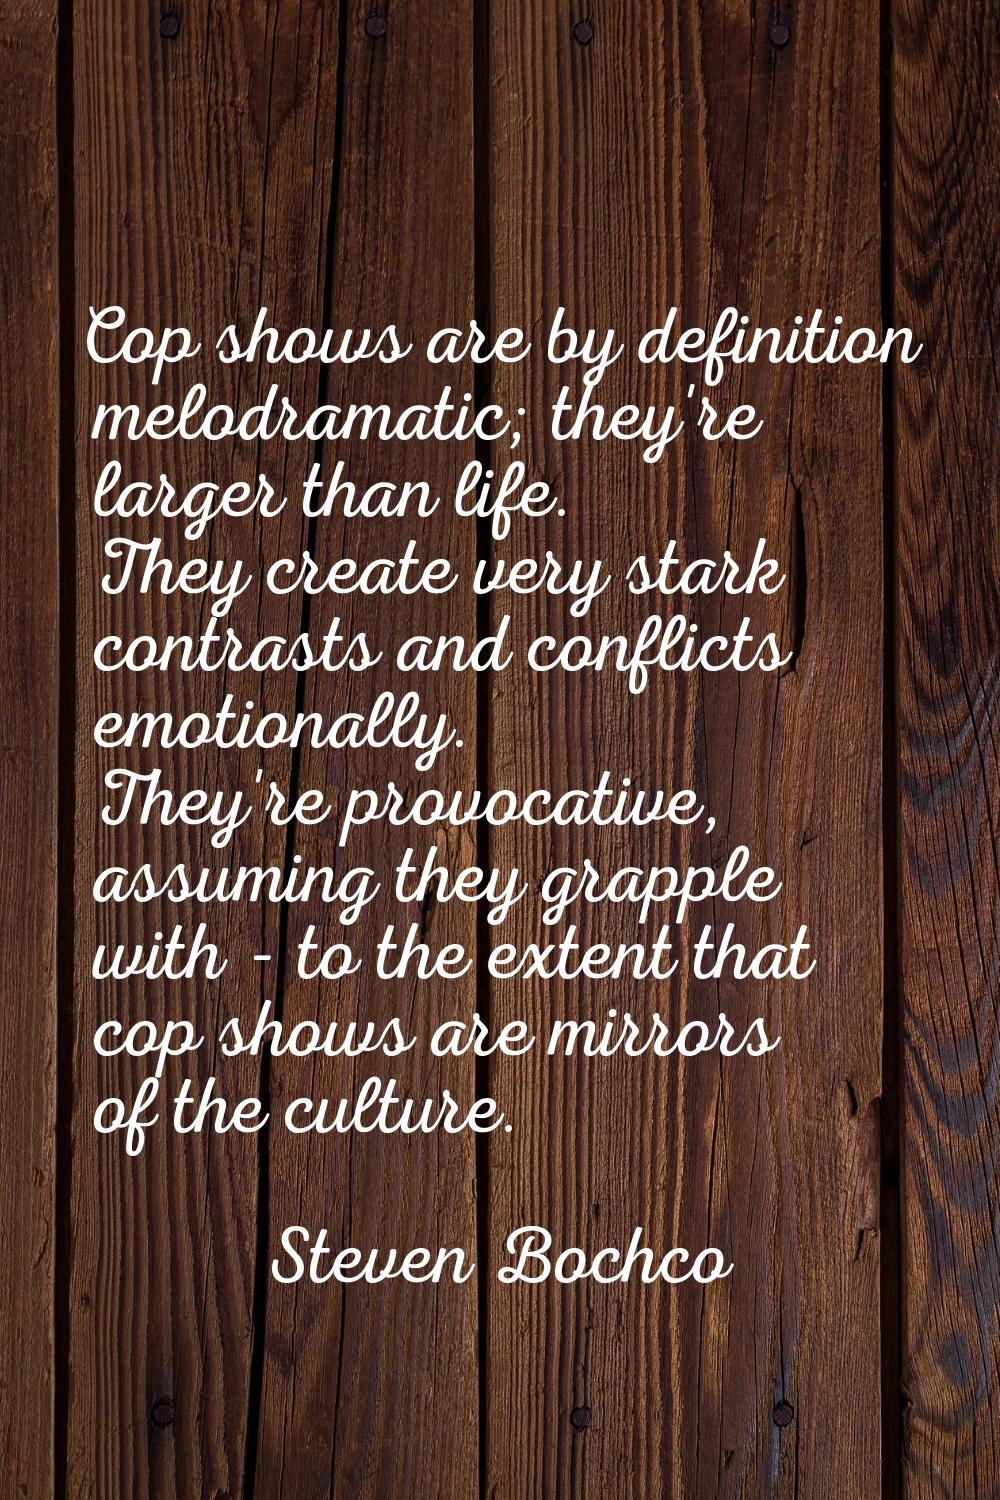 Cop shows are by definition melodramatic; they're larger than life. They create very stark contrast